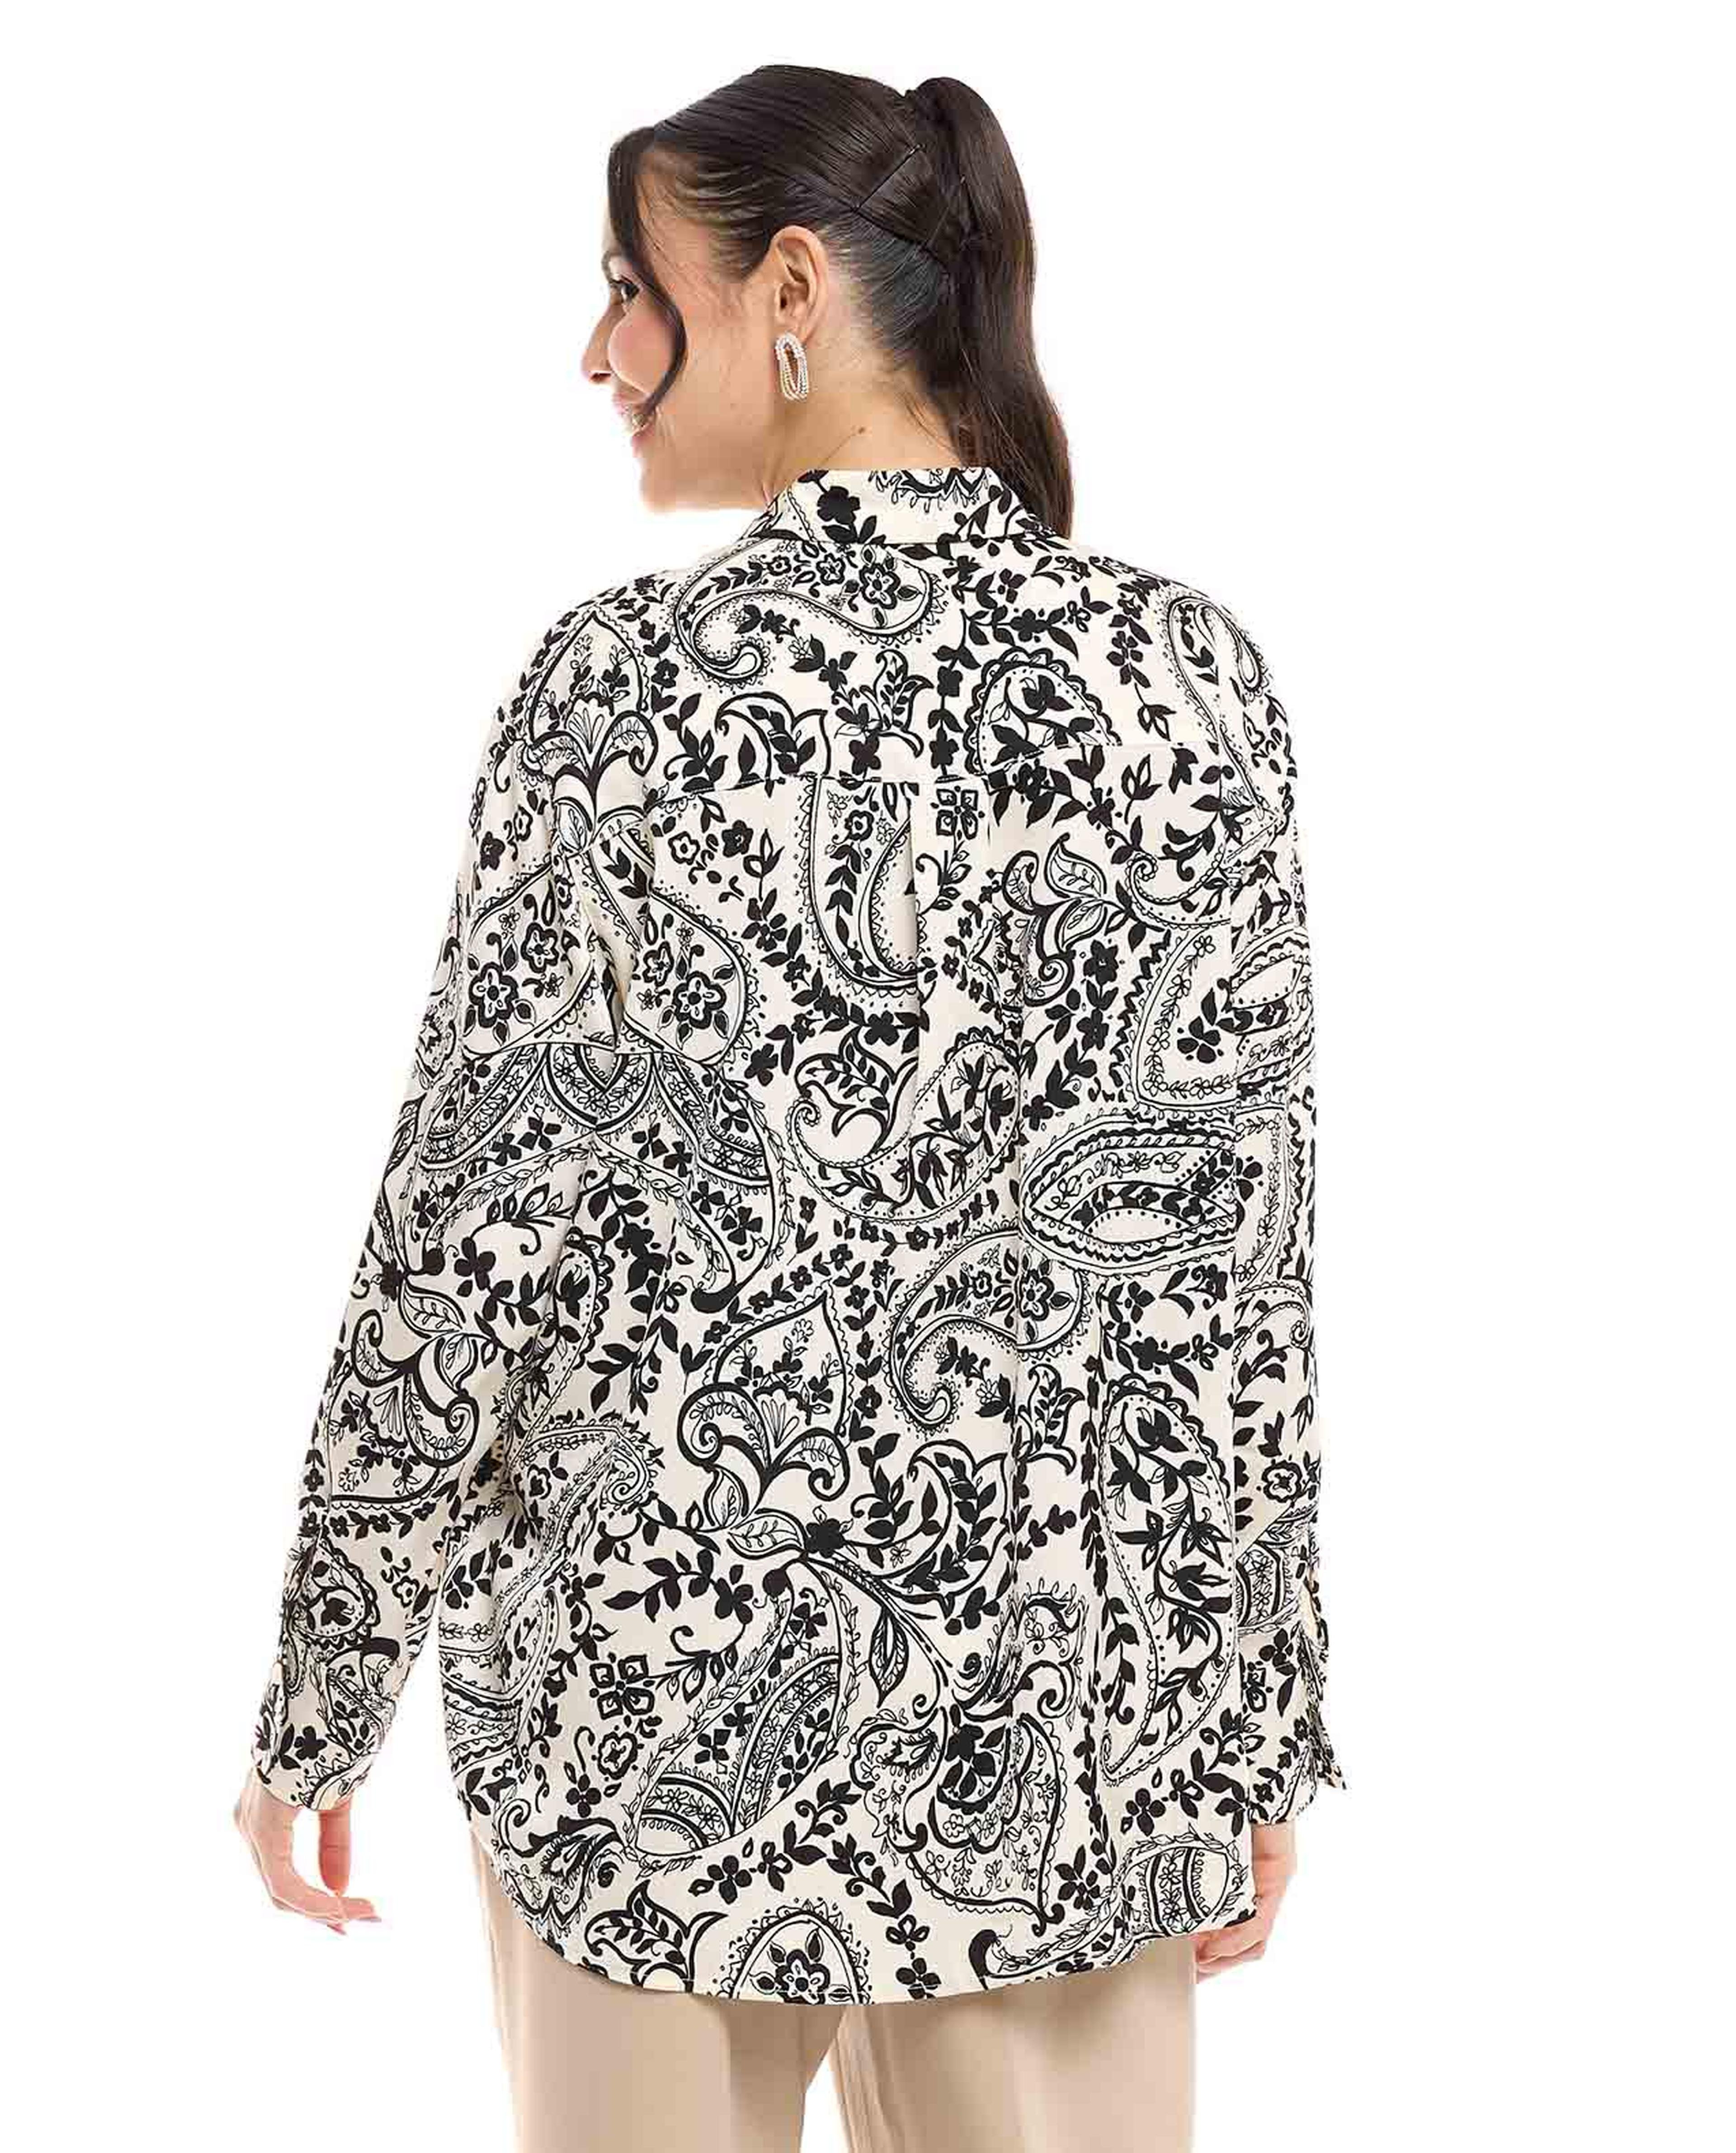 Paisley Printed Shirt with Classic Collar and Long Sleeves